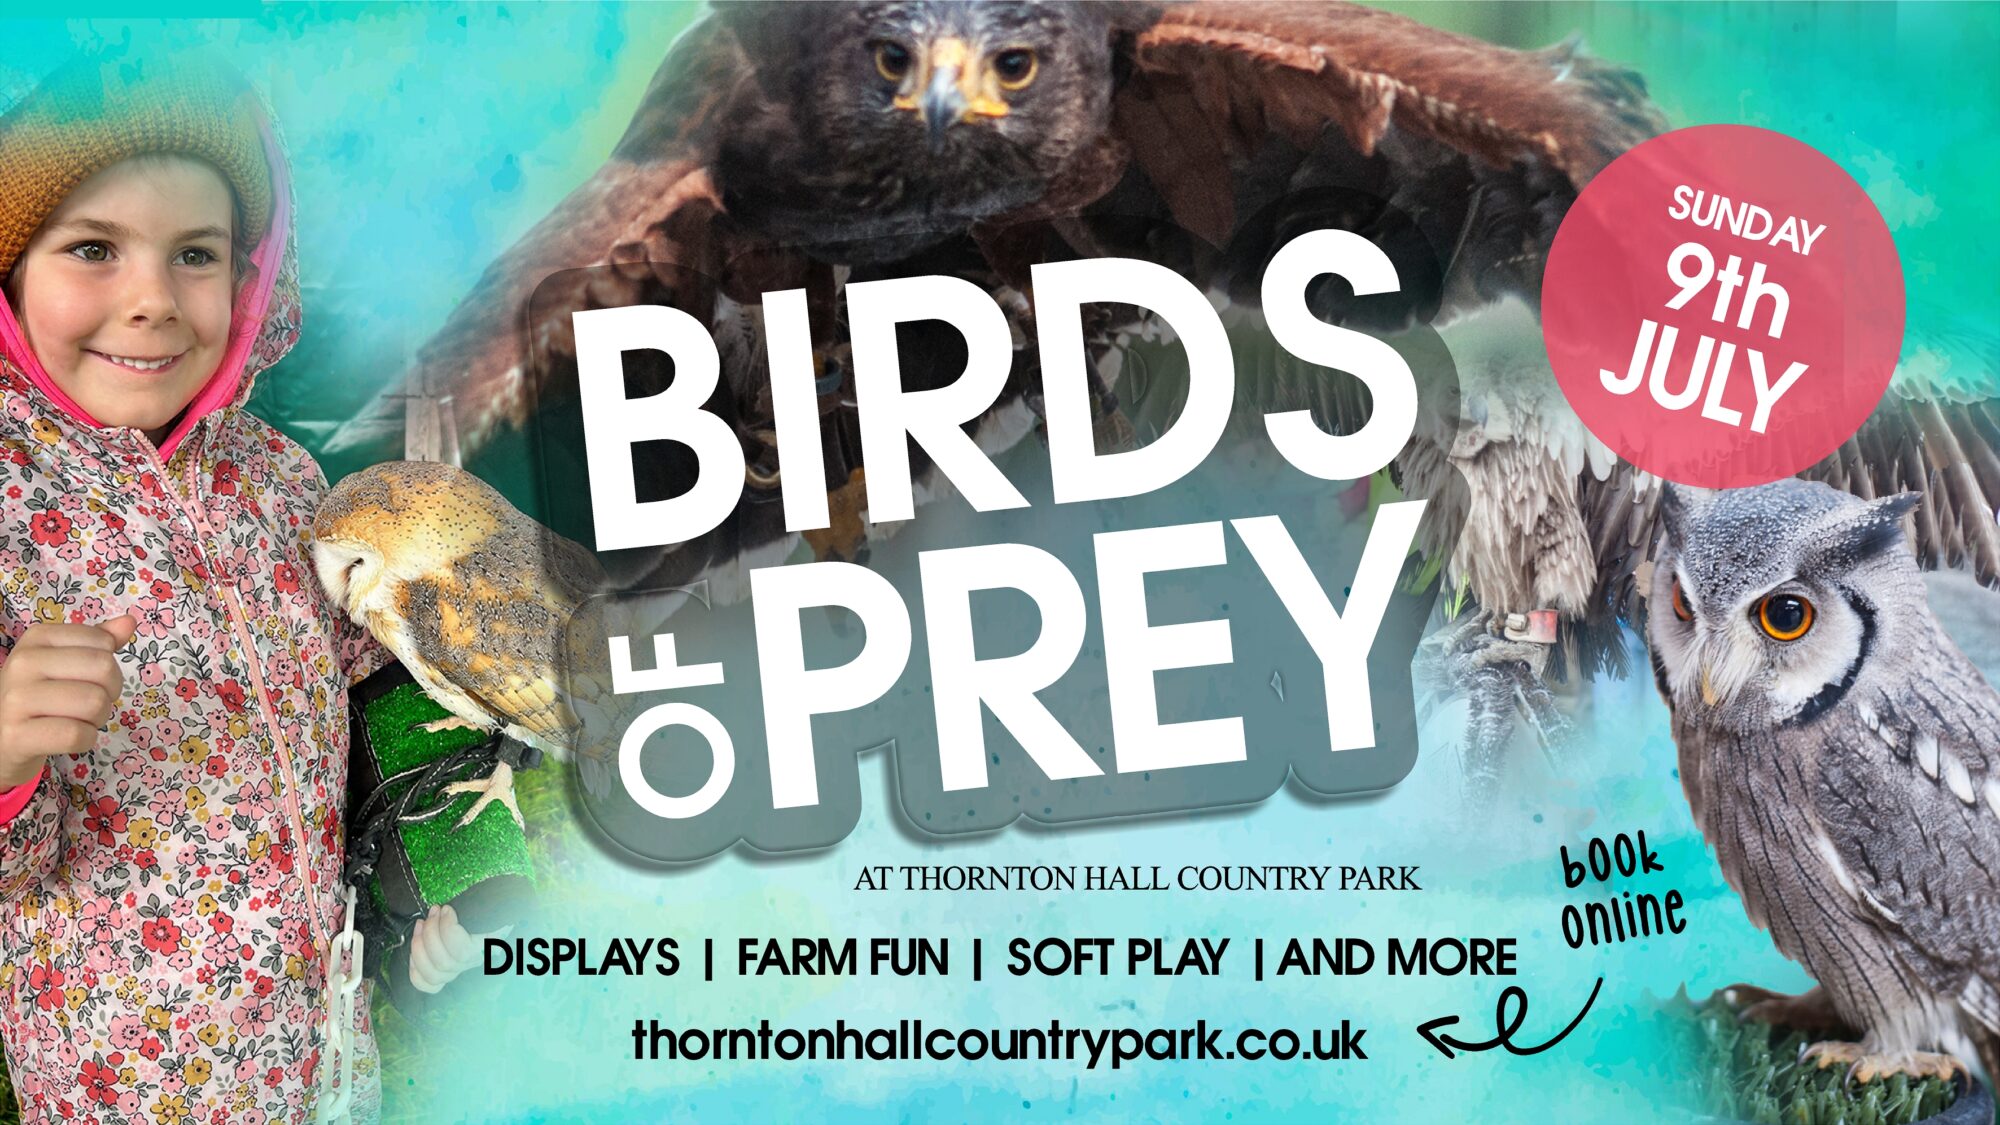 Image name Ticket and FB Graphic Rectangular 1 the 32 image from the post BIRDS OF PREY at Thornton Hall Country Park in Yorkshire.com.